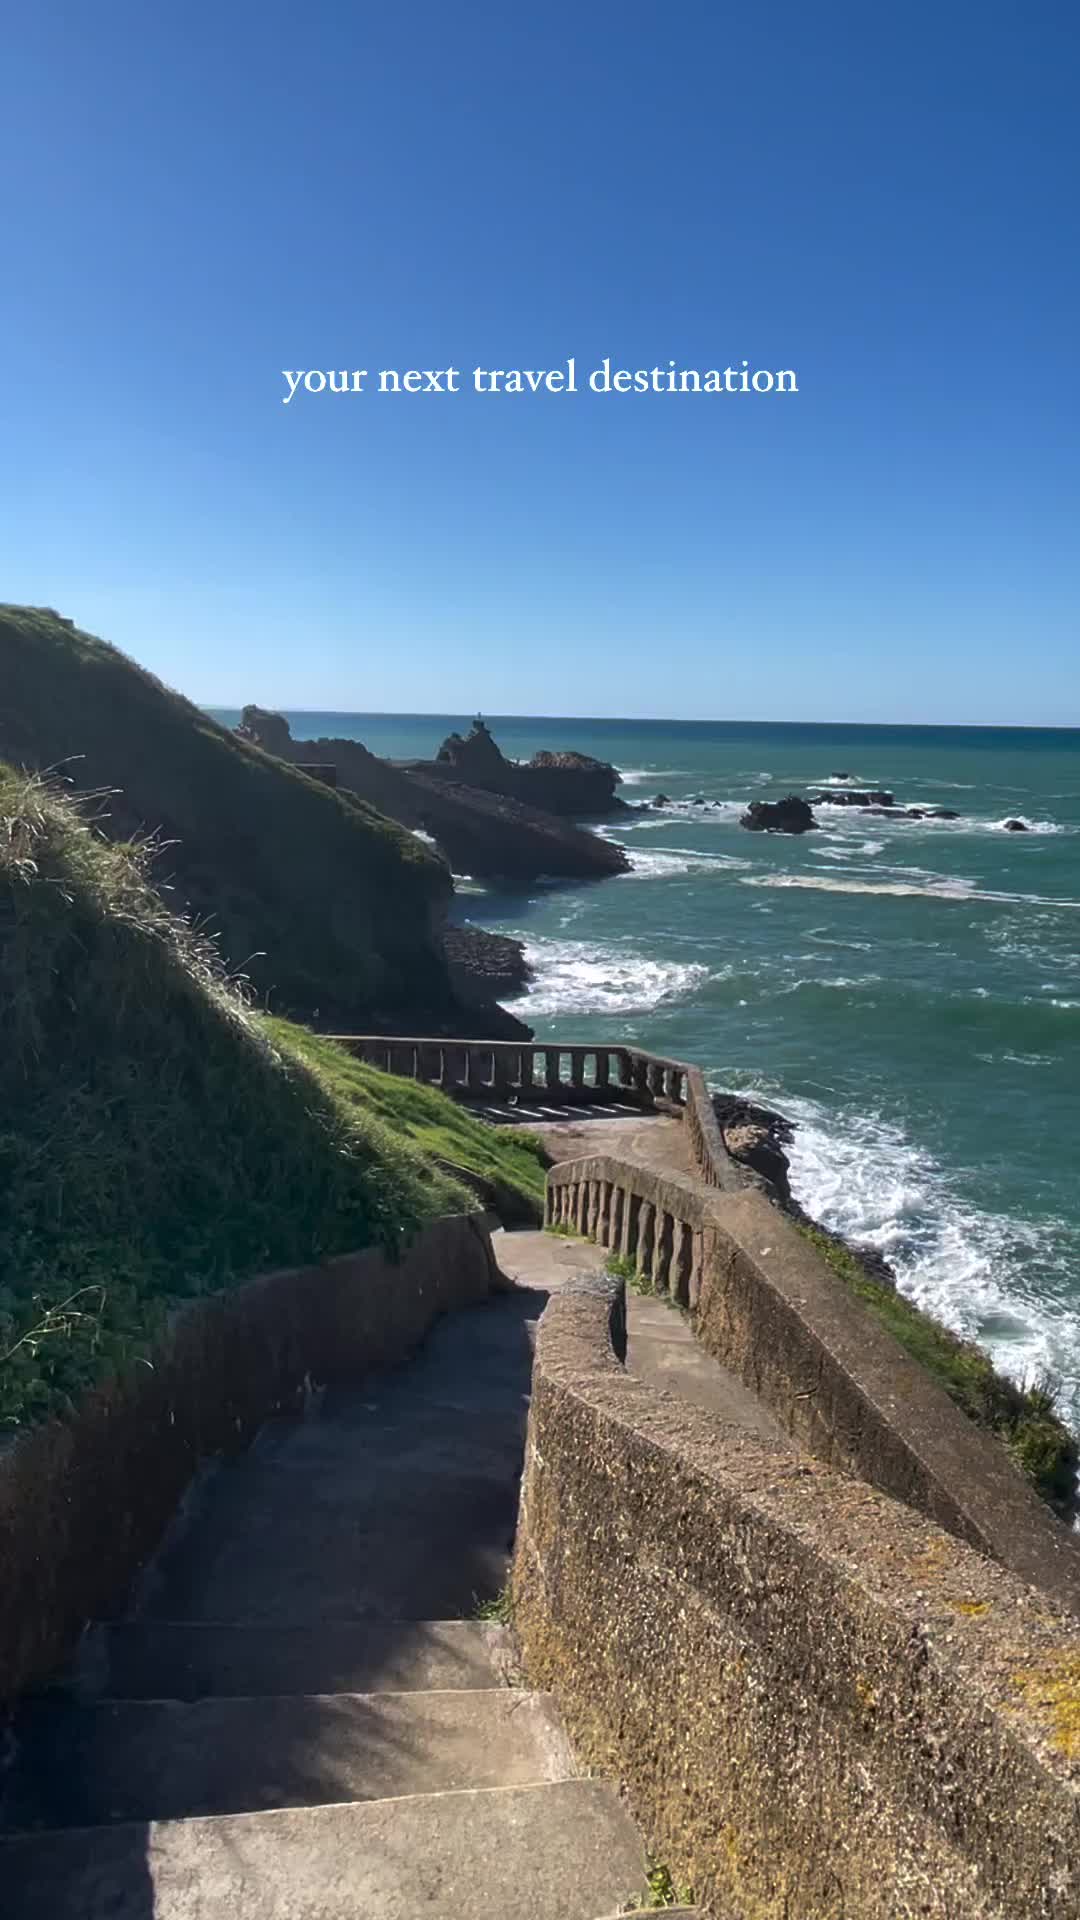 Explore Biarritz: Surf, Sunsets, and Scenic Views